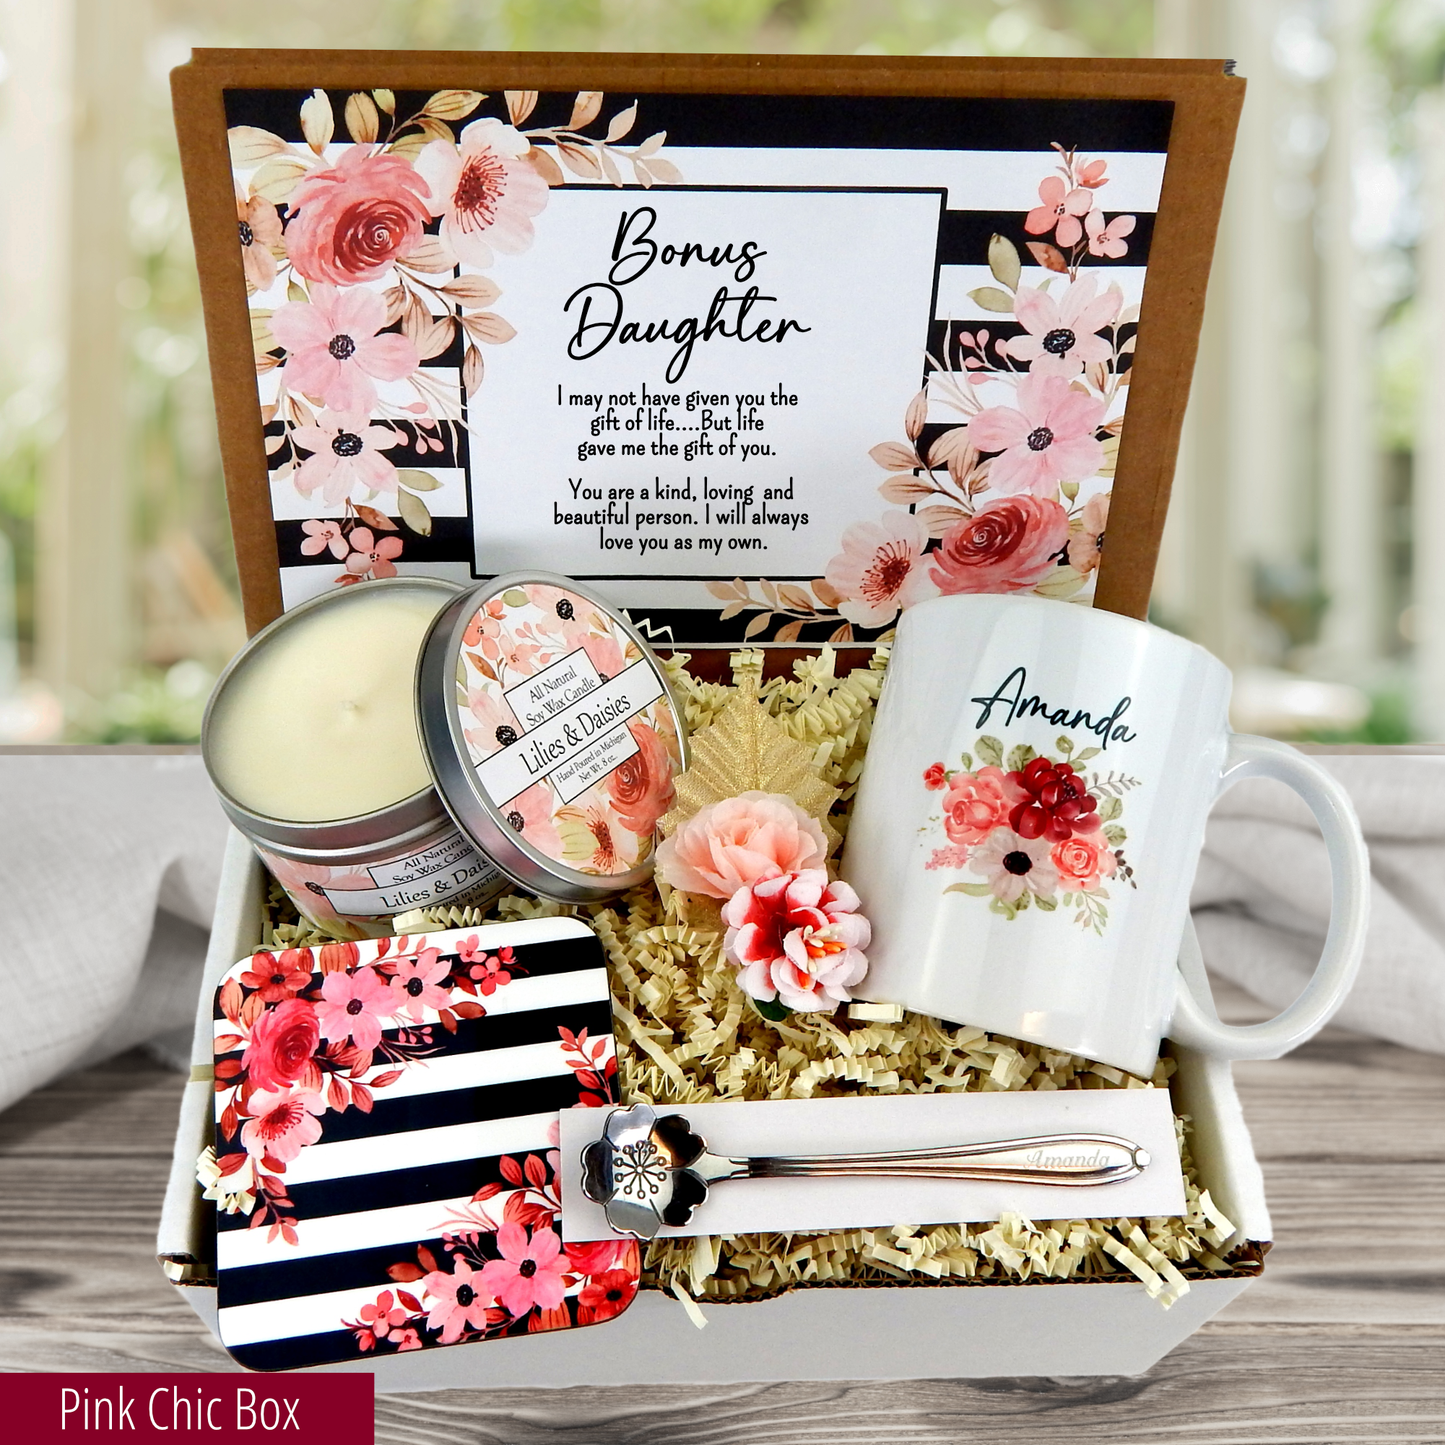 Show your love with this special gift box for your bonus daughter with pink theme.